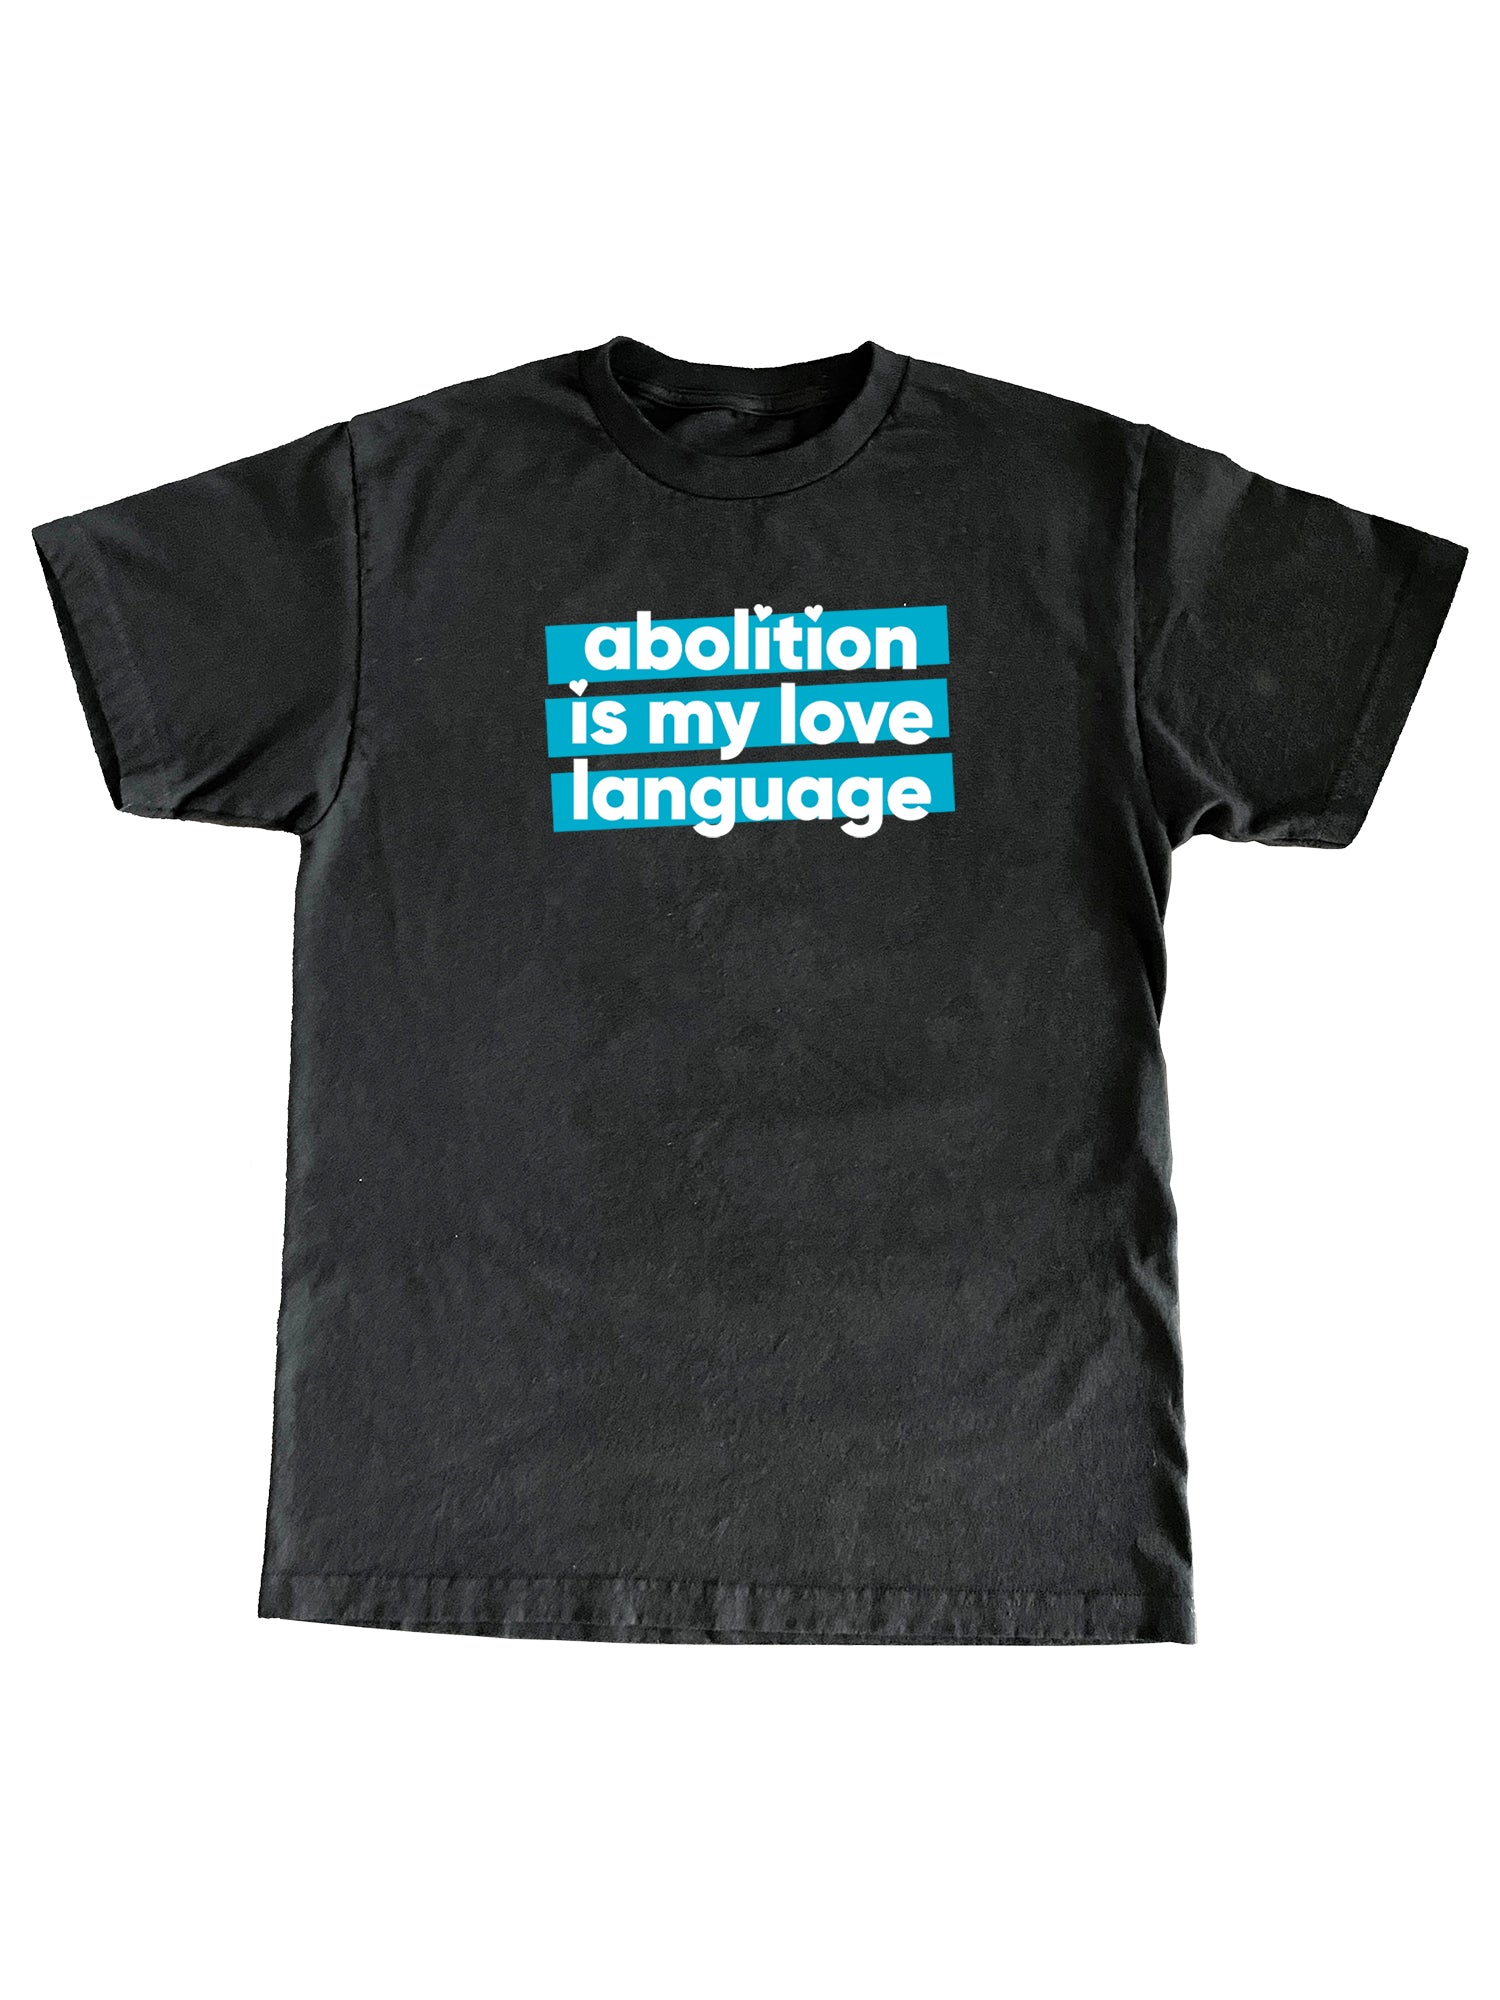 Abolition is My Love Language Tee - Initiate Justice Marketplace